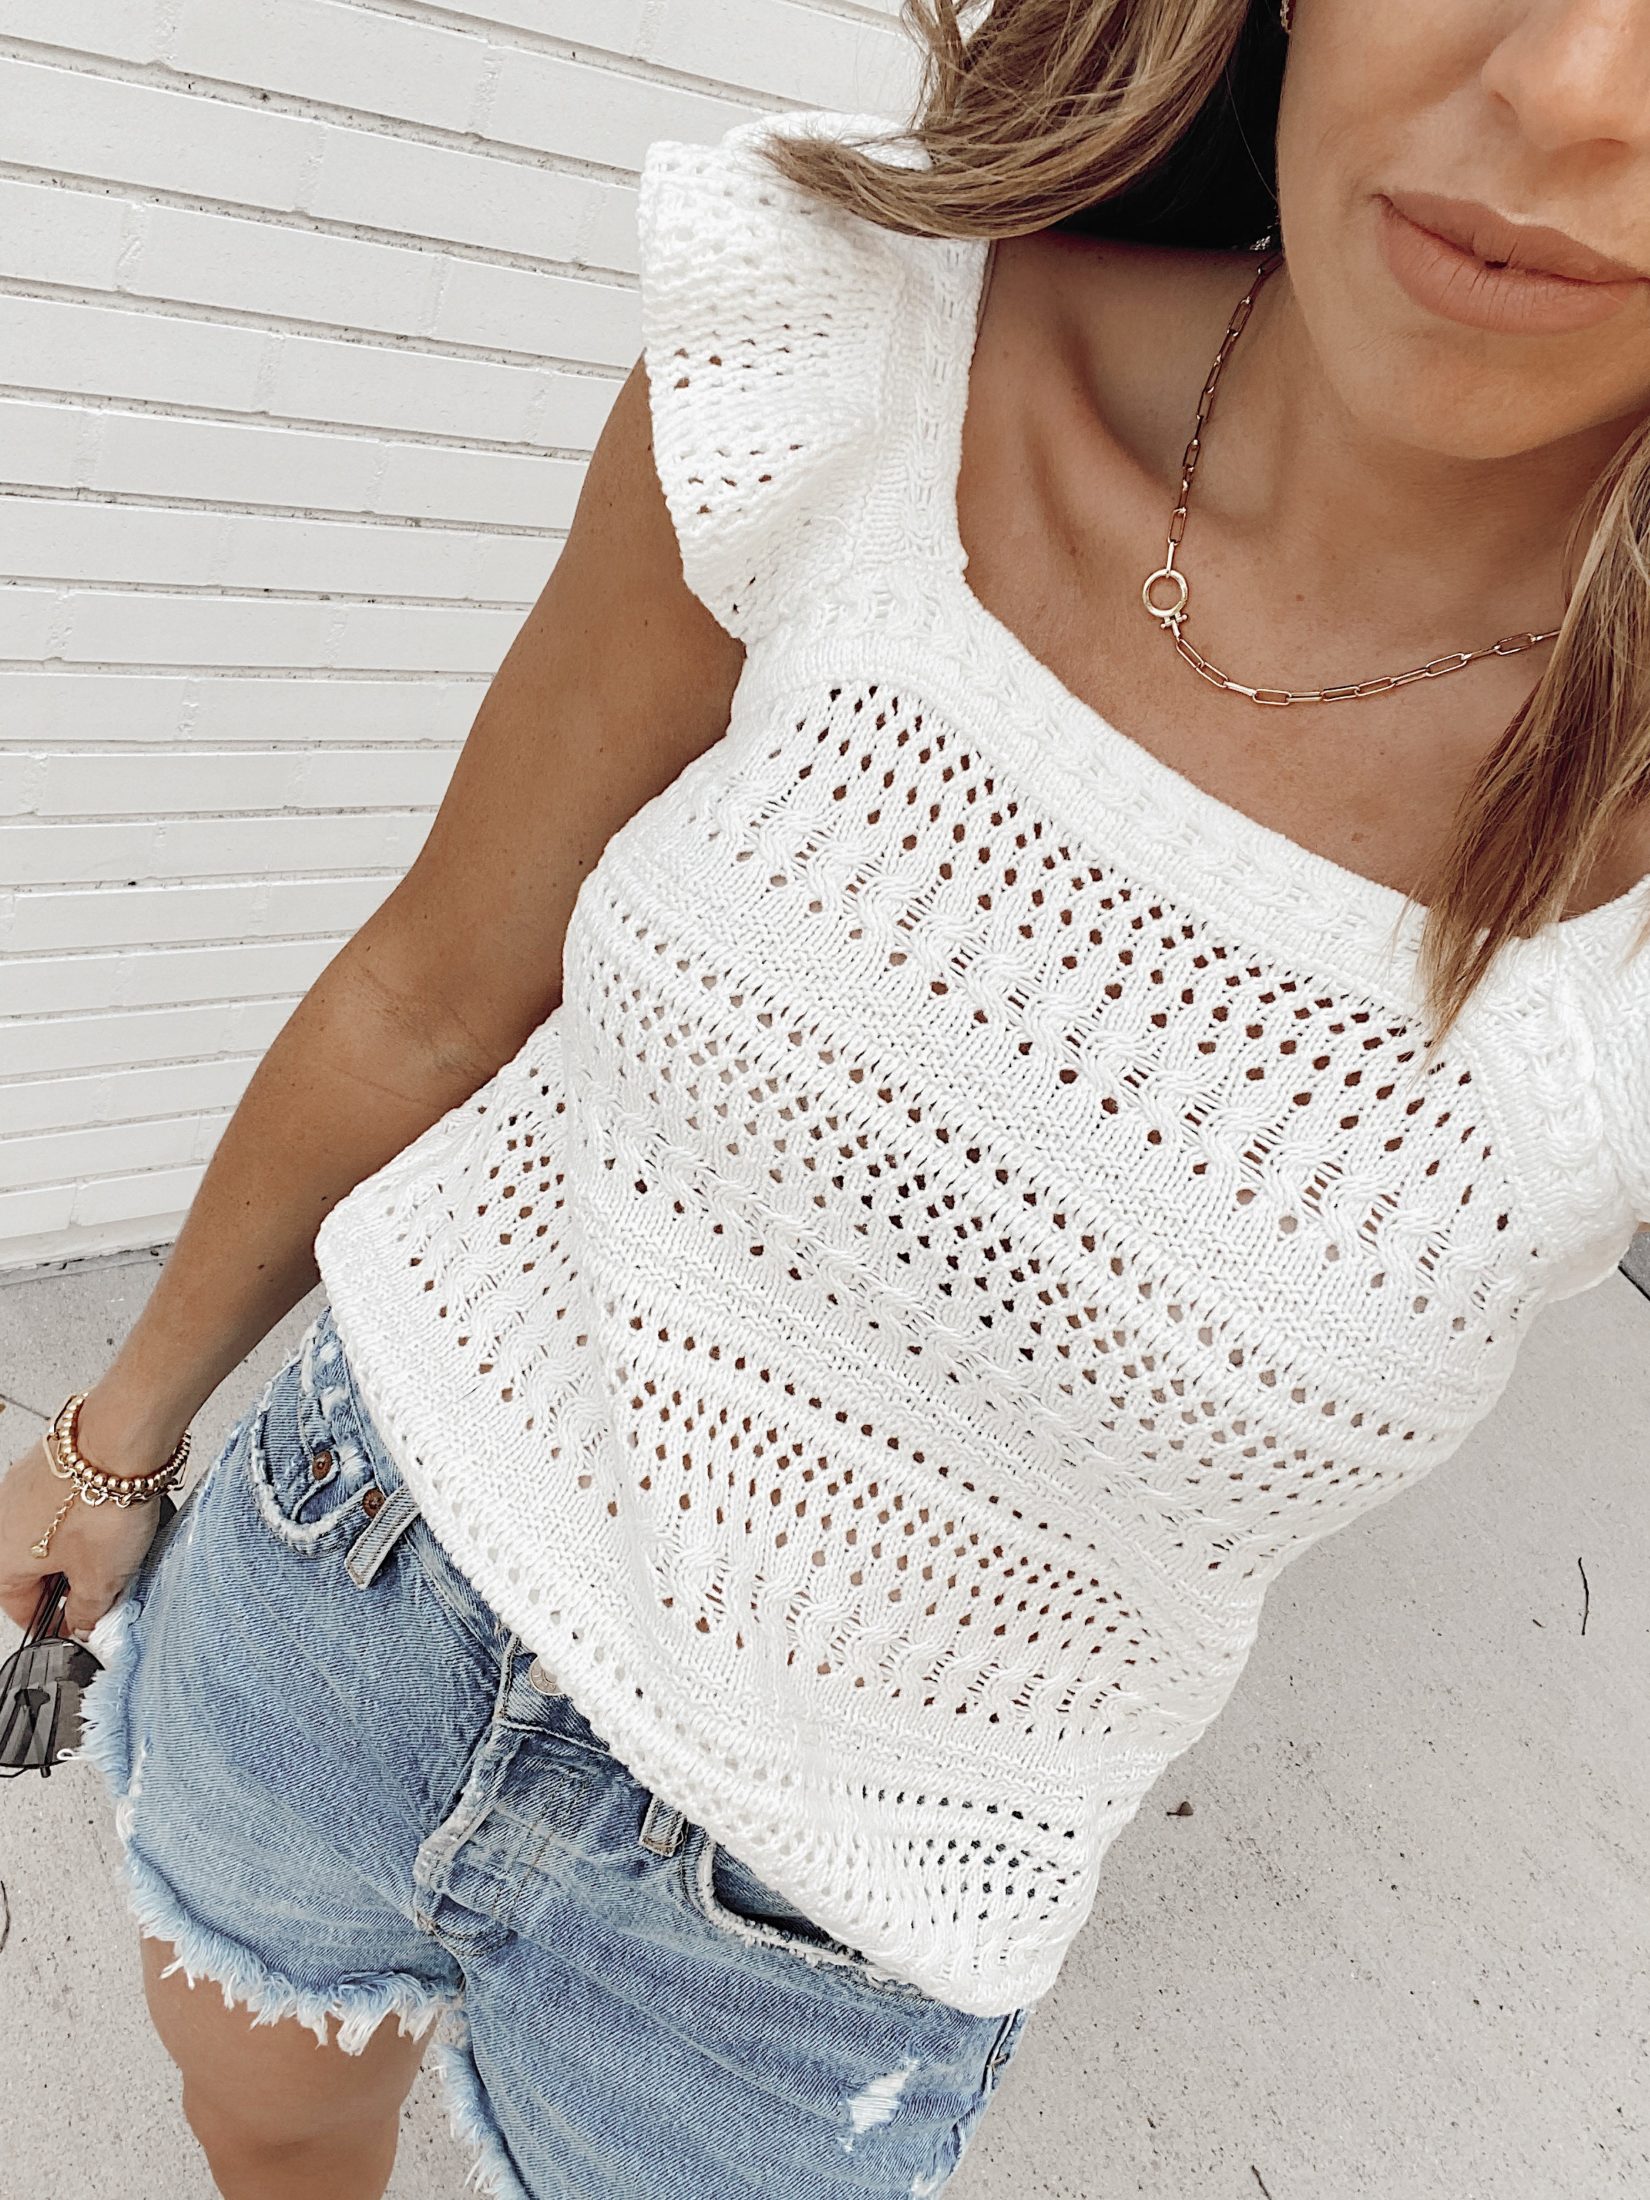 spring summer minimalist fashion outfit idea - white knit top with denim shorts